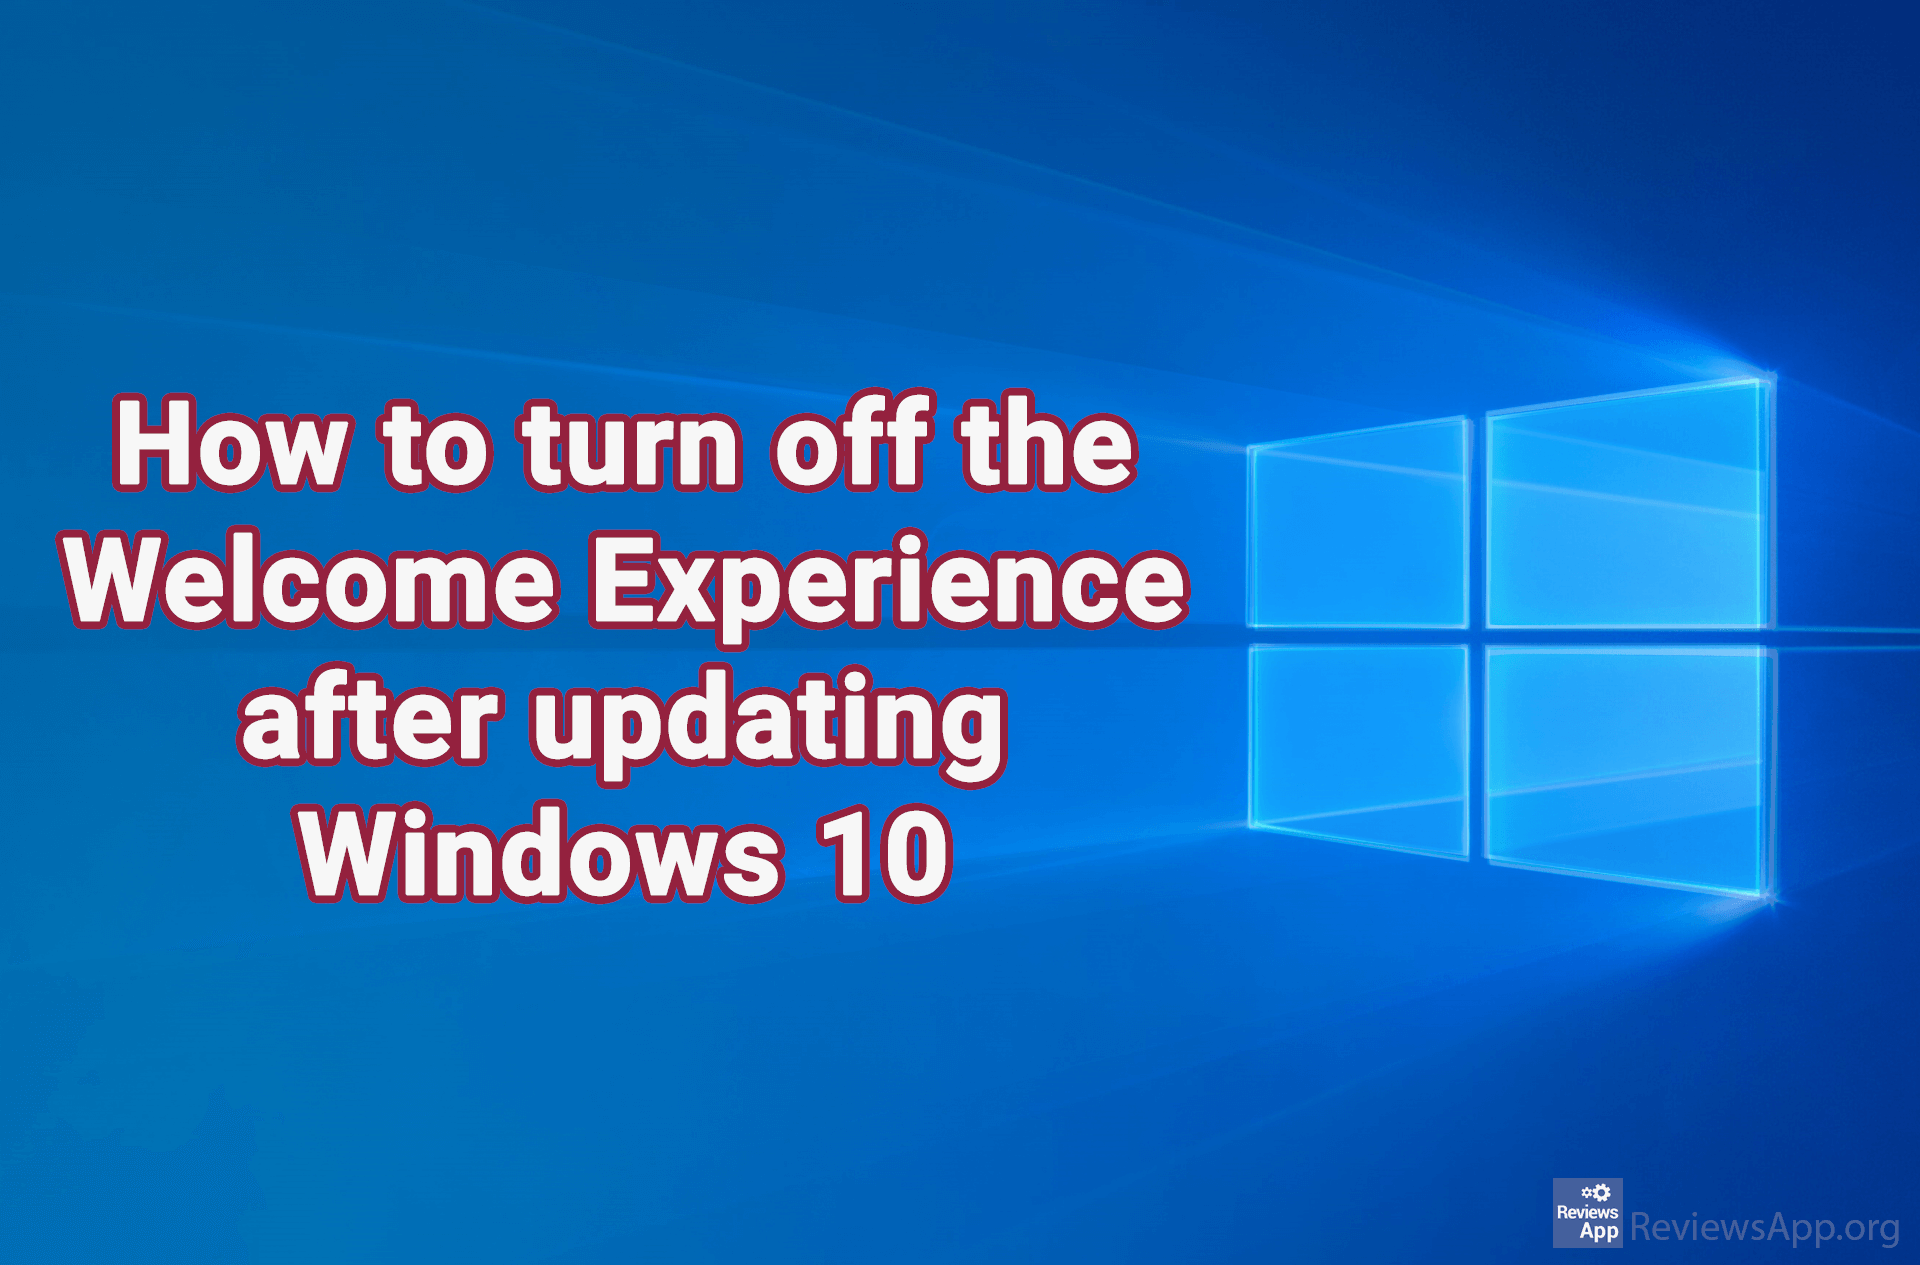 How to turn off the Welcome Experience after updating Windows 10